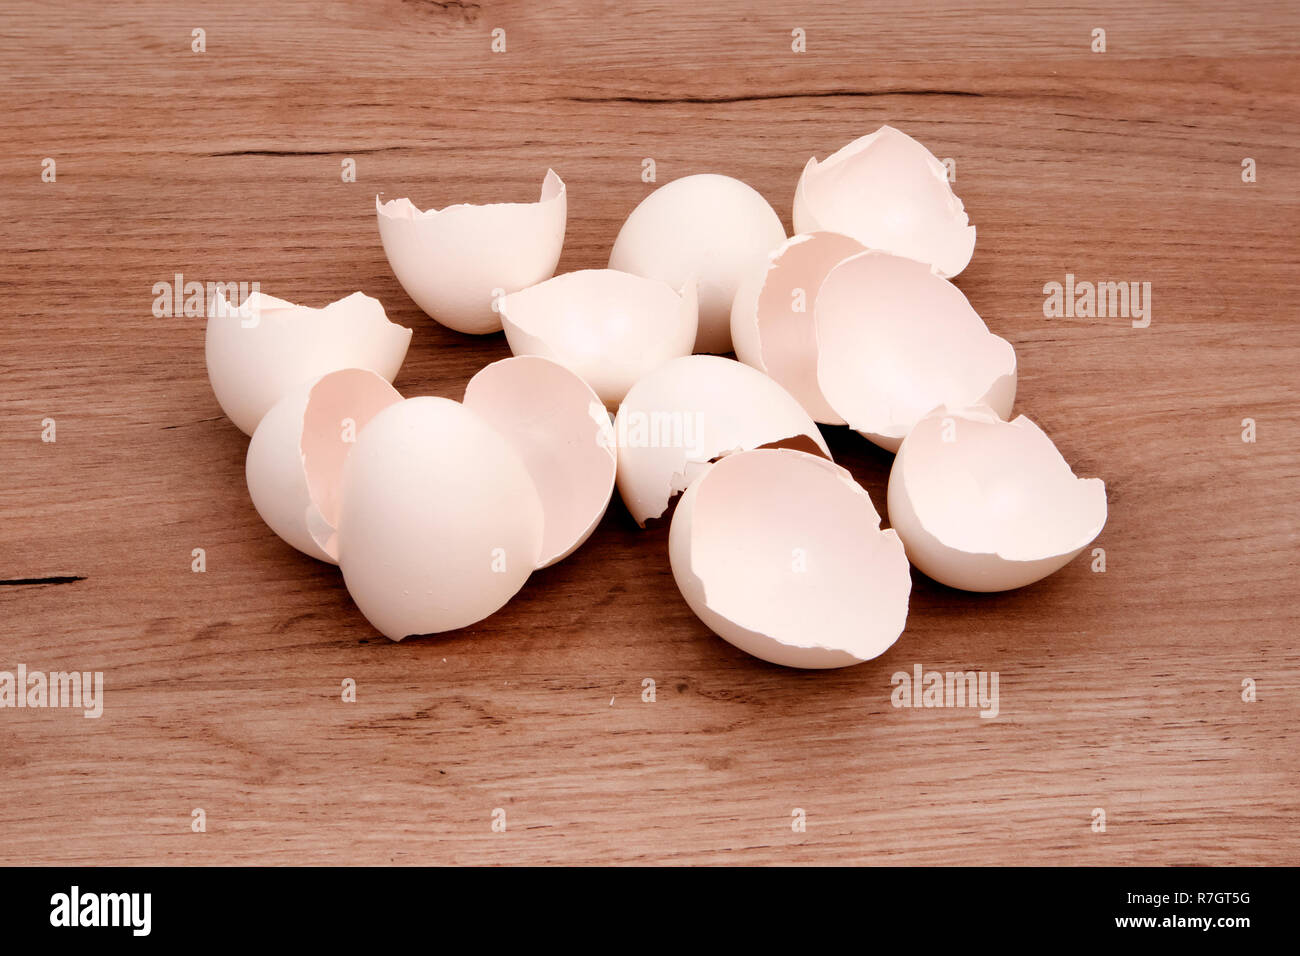 A pile of empty white egg shells lying on a wooden board surface Stock Photo